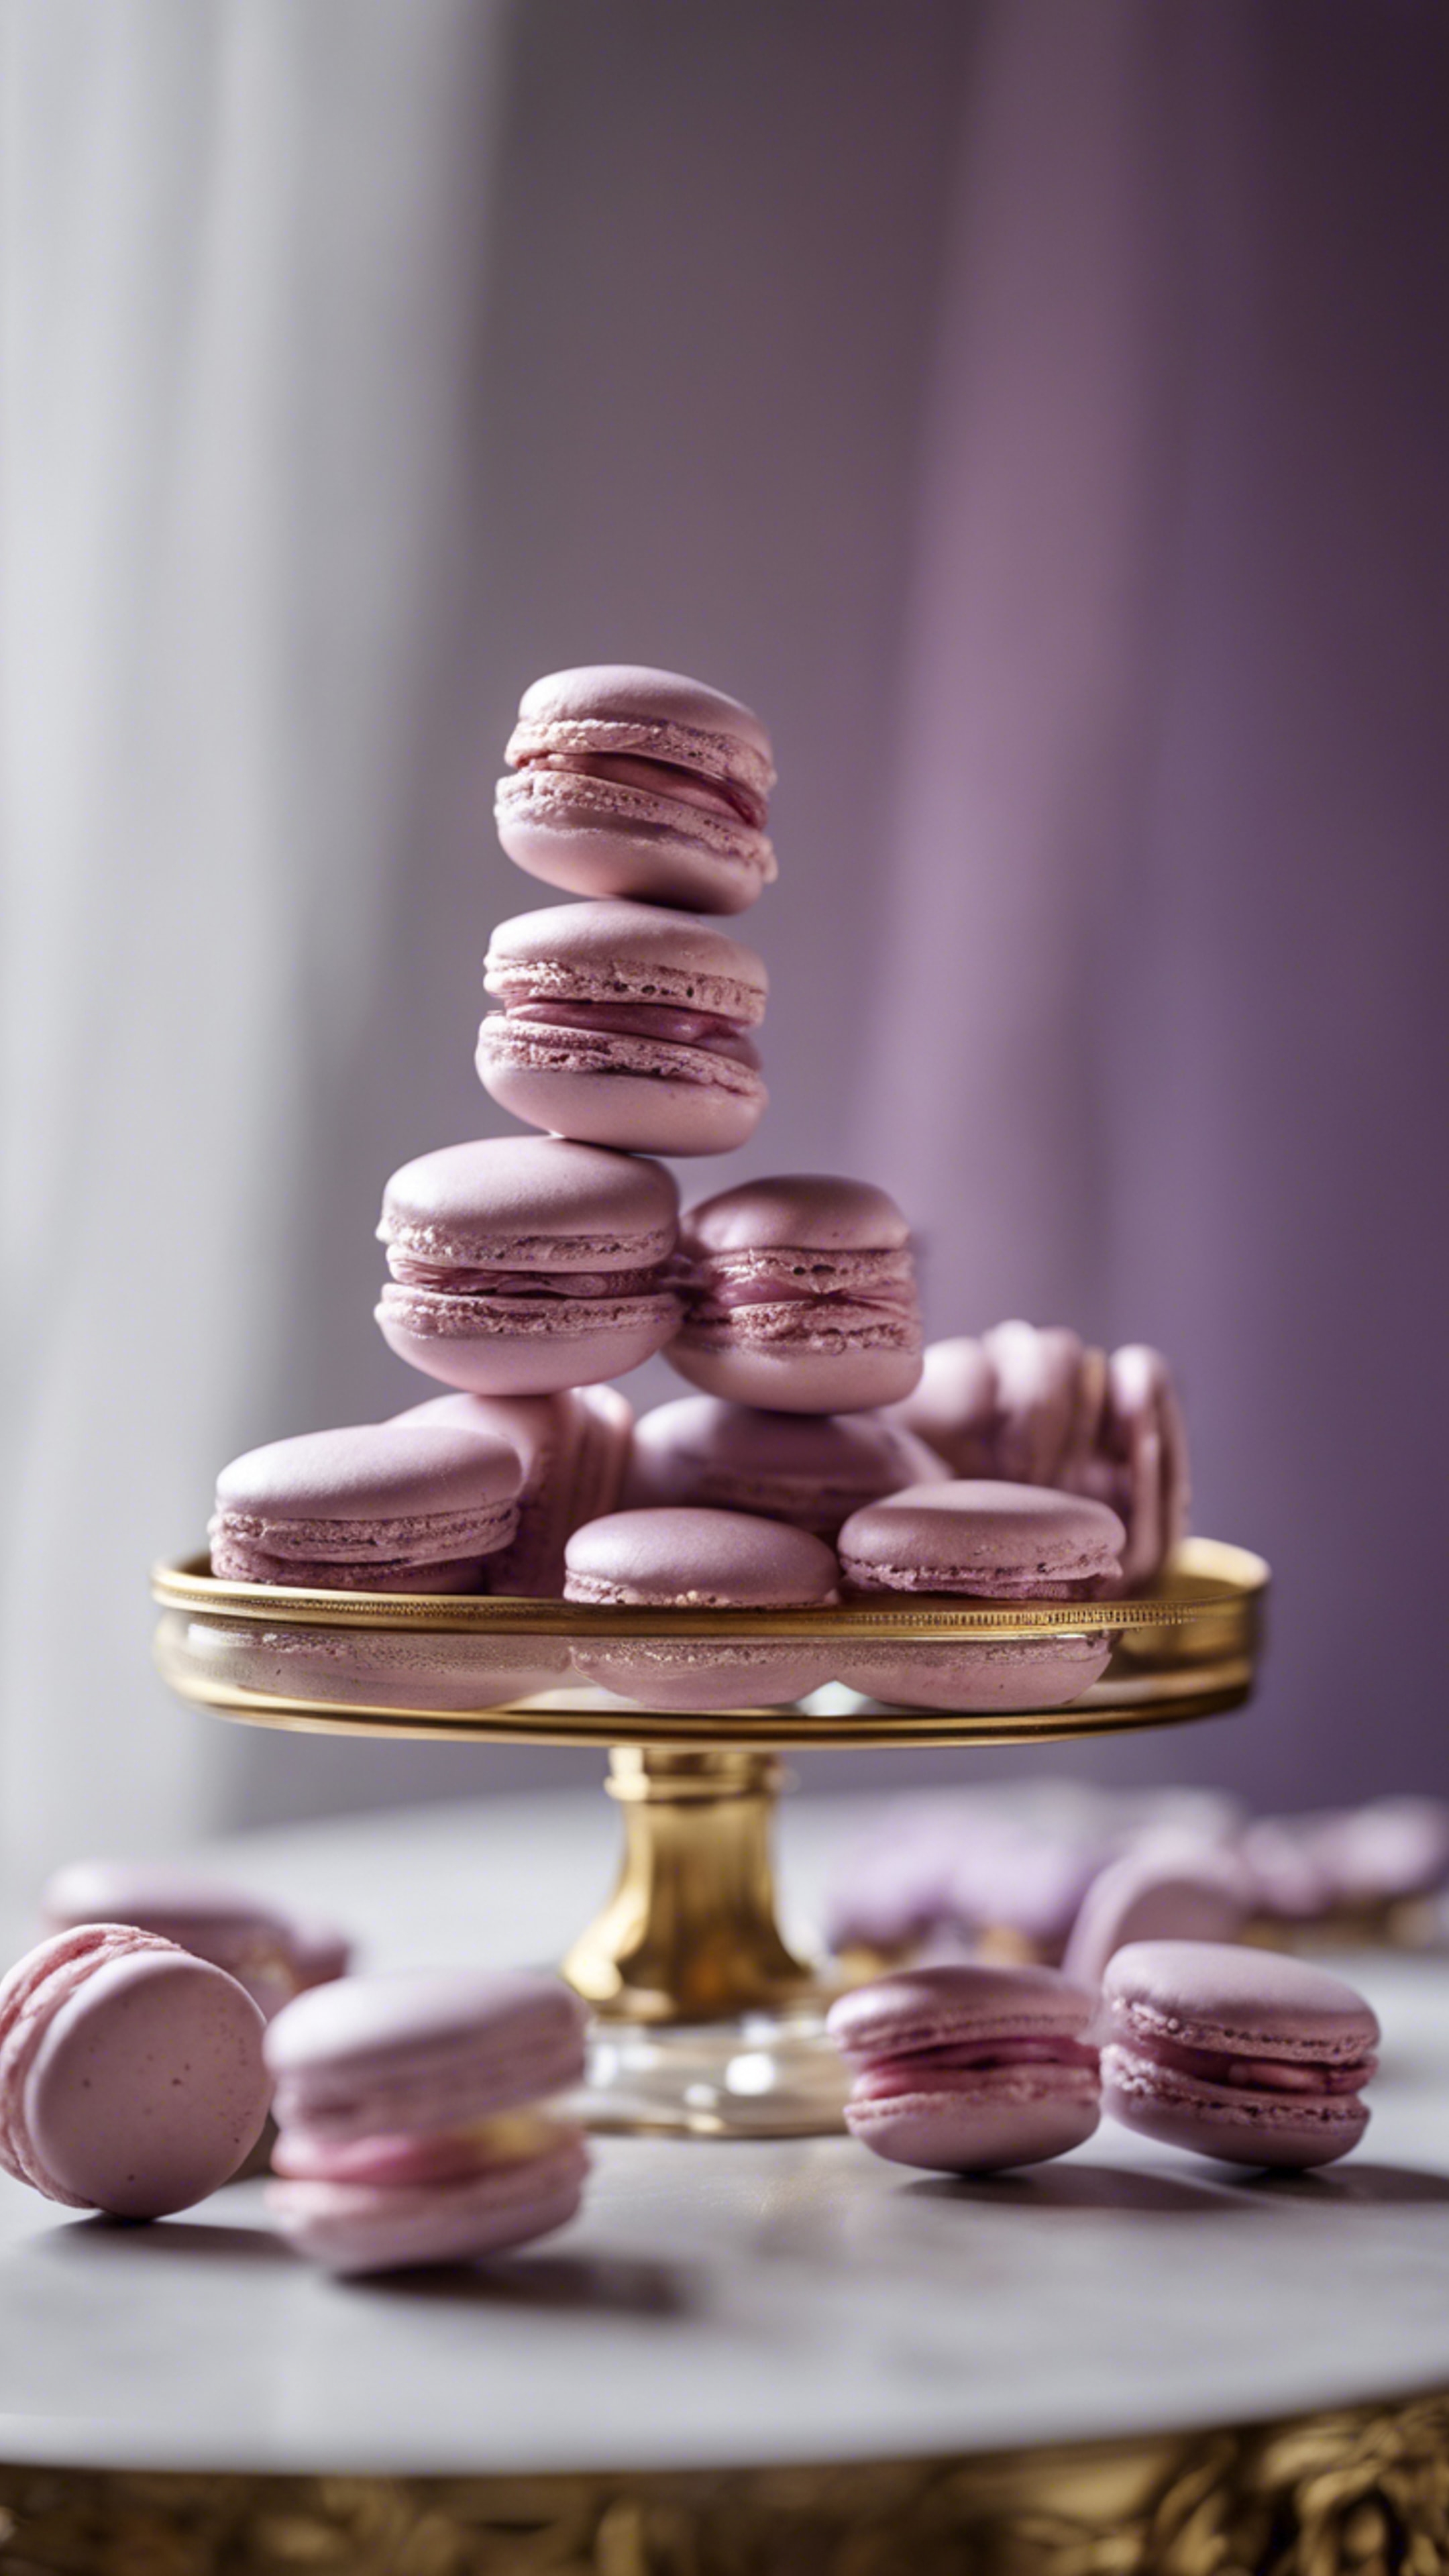 A box of light purple macarons perched on a chic, creamy pedestal table. Ταπετσαρία[d2f6108c9ad74ba2a0c7]